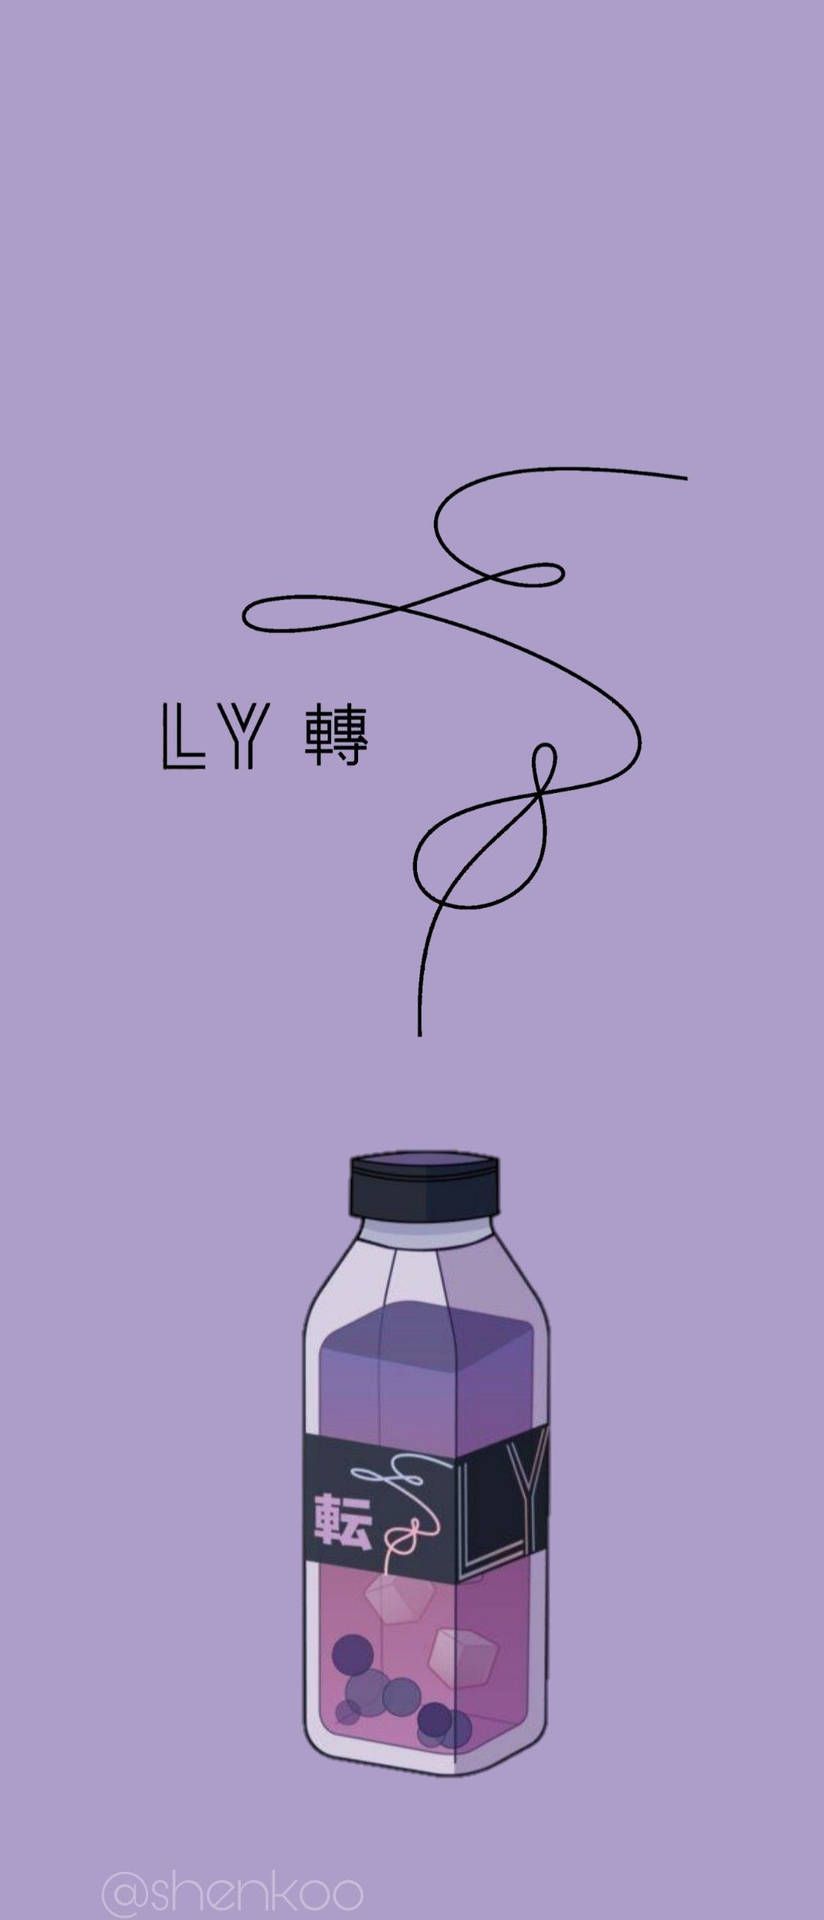 A purple bottle with the word 'lyz' on it - BTS